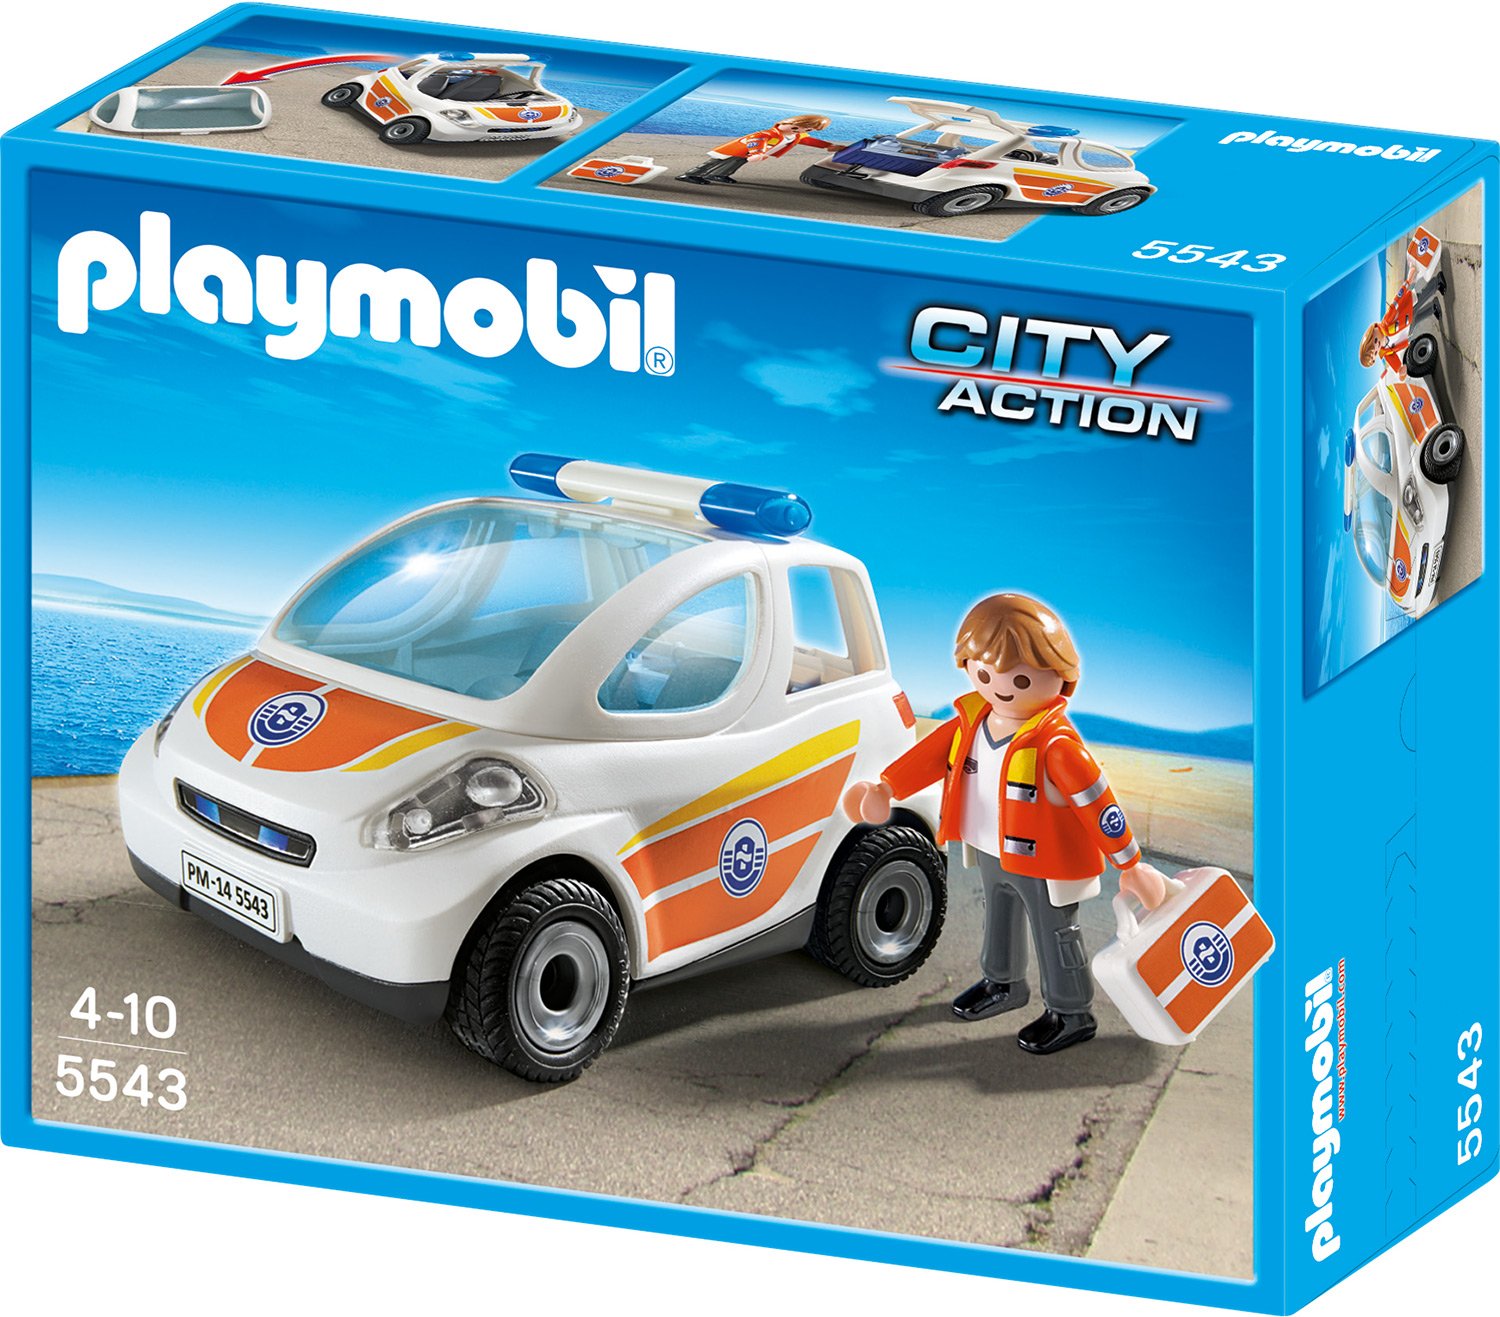 Playmobil City Action Emergency Vehicle